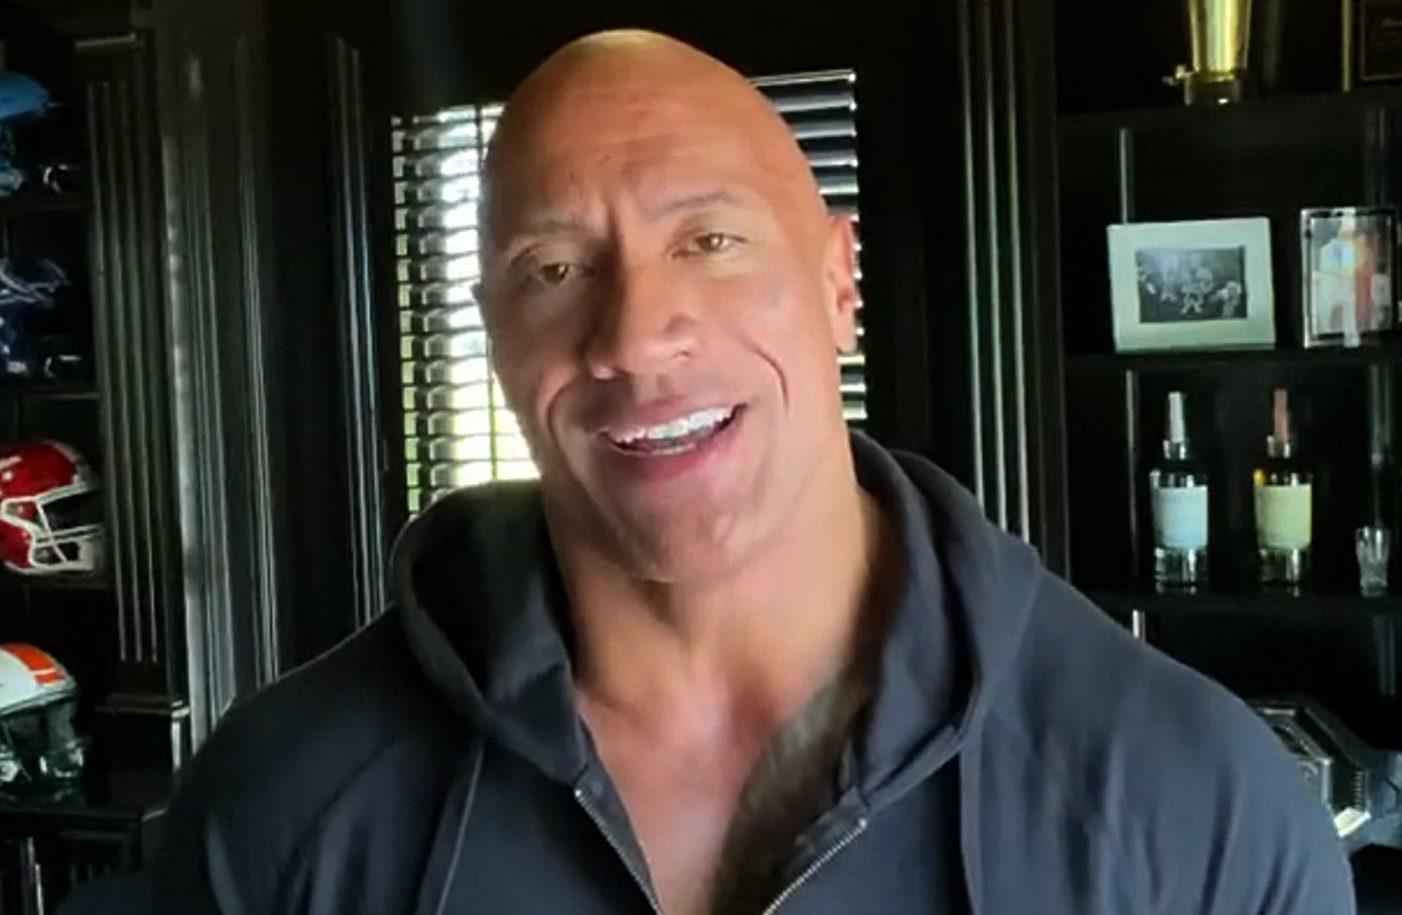 Superstar actor The Rock reveals he and his family are recovering from COVID-19